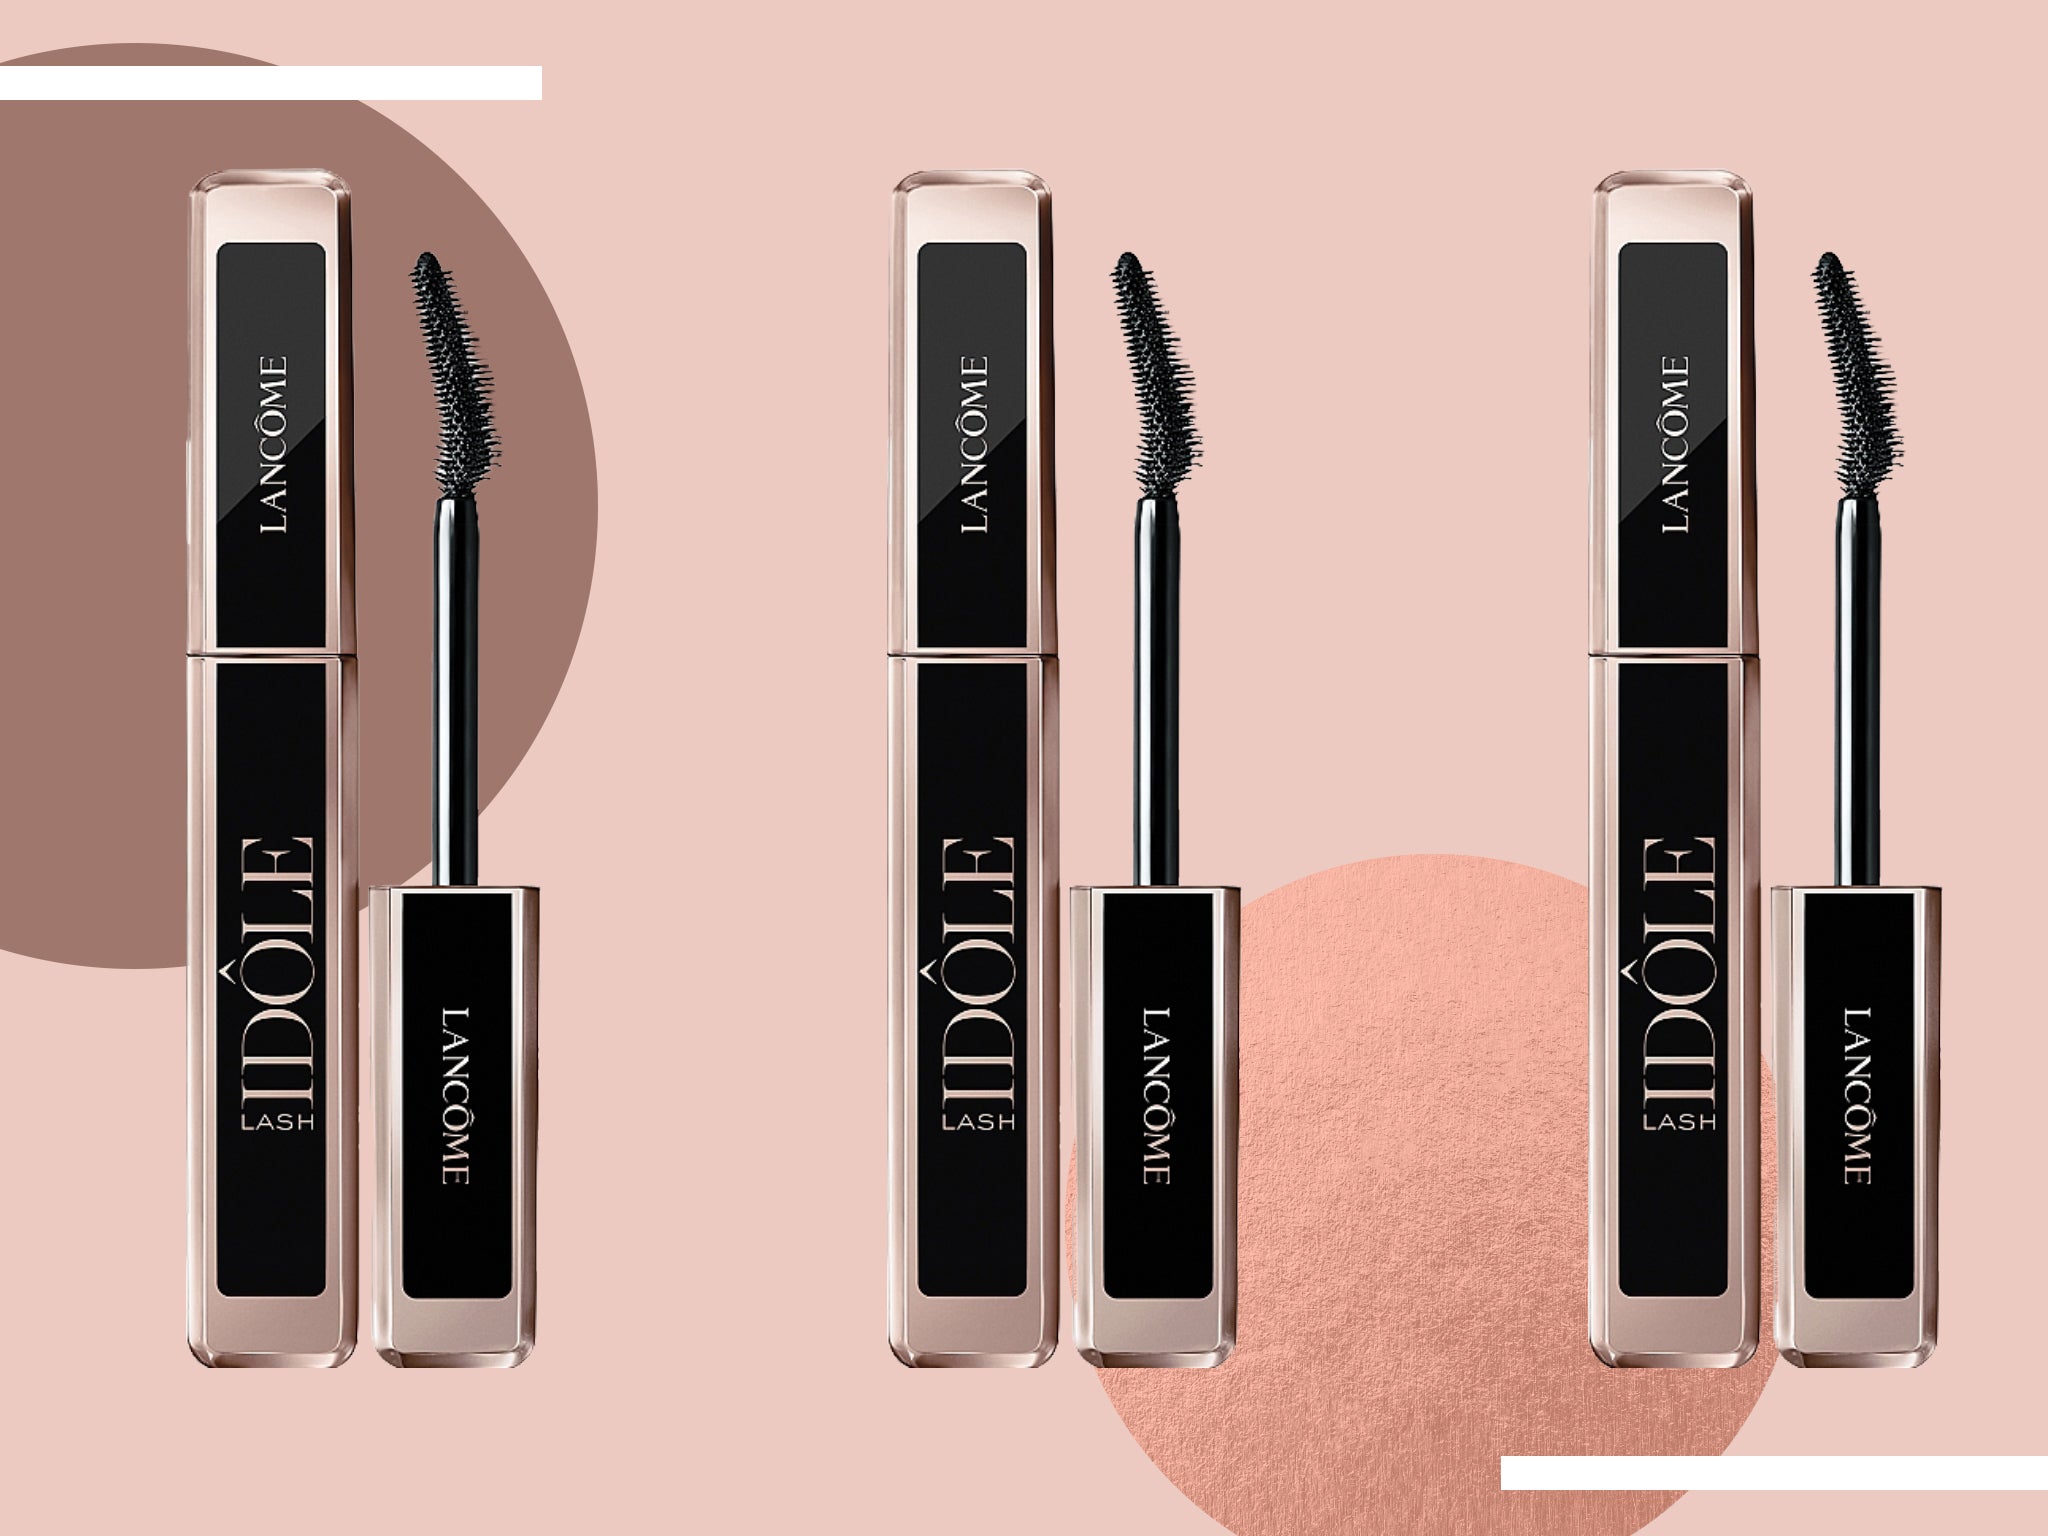 Lancôme lash idôle mascara review: We're converted The Independent